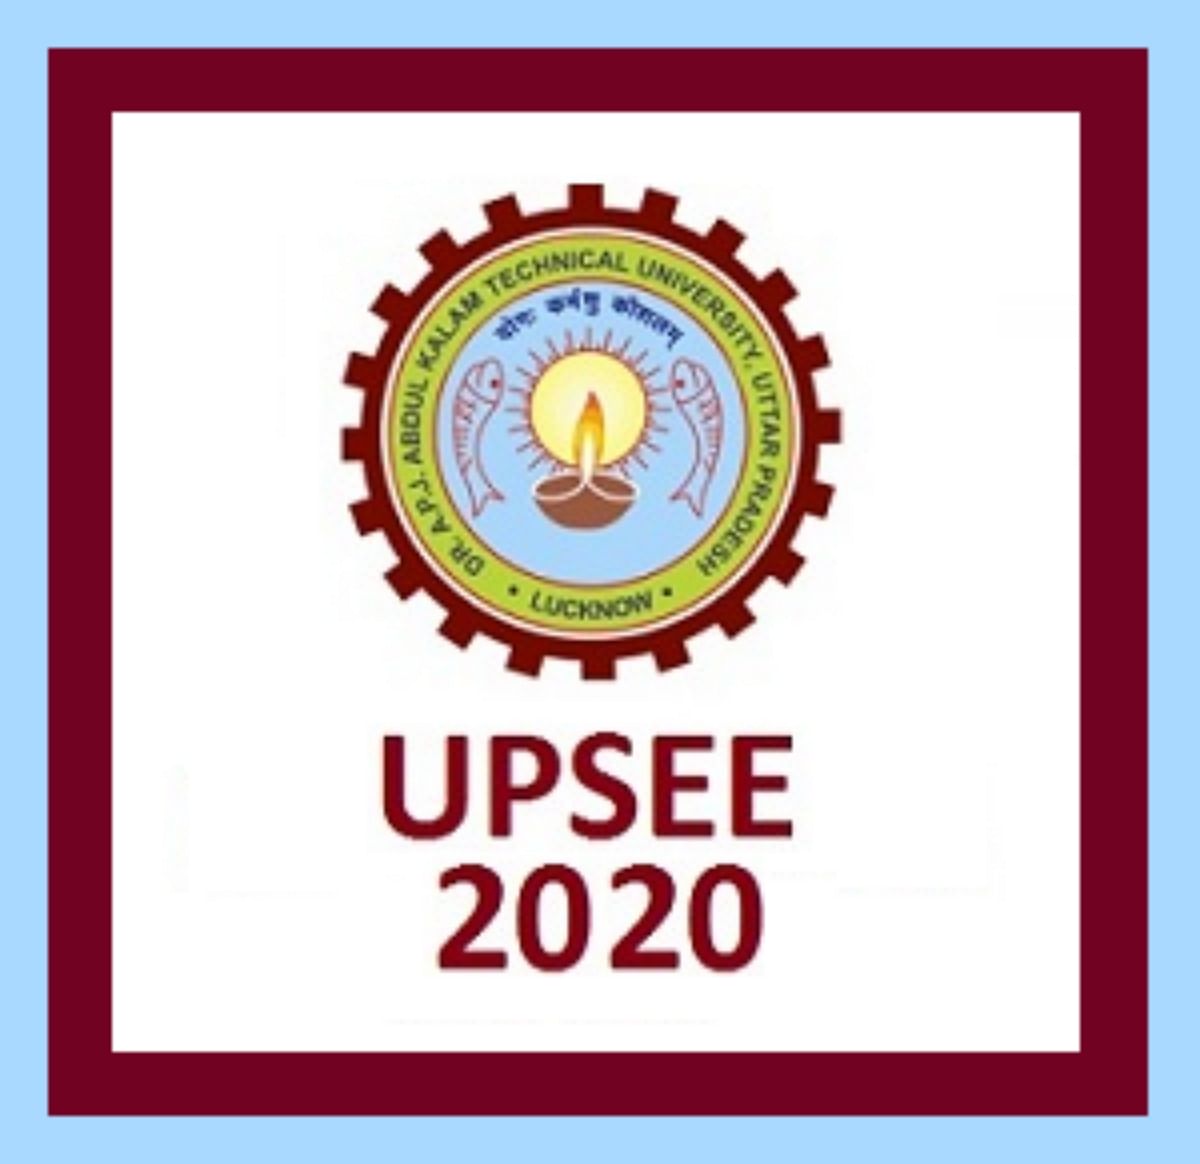 UPSEE 2020: 30 Days Left in Exam, Know What to Do During Preparations